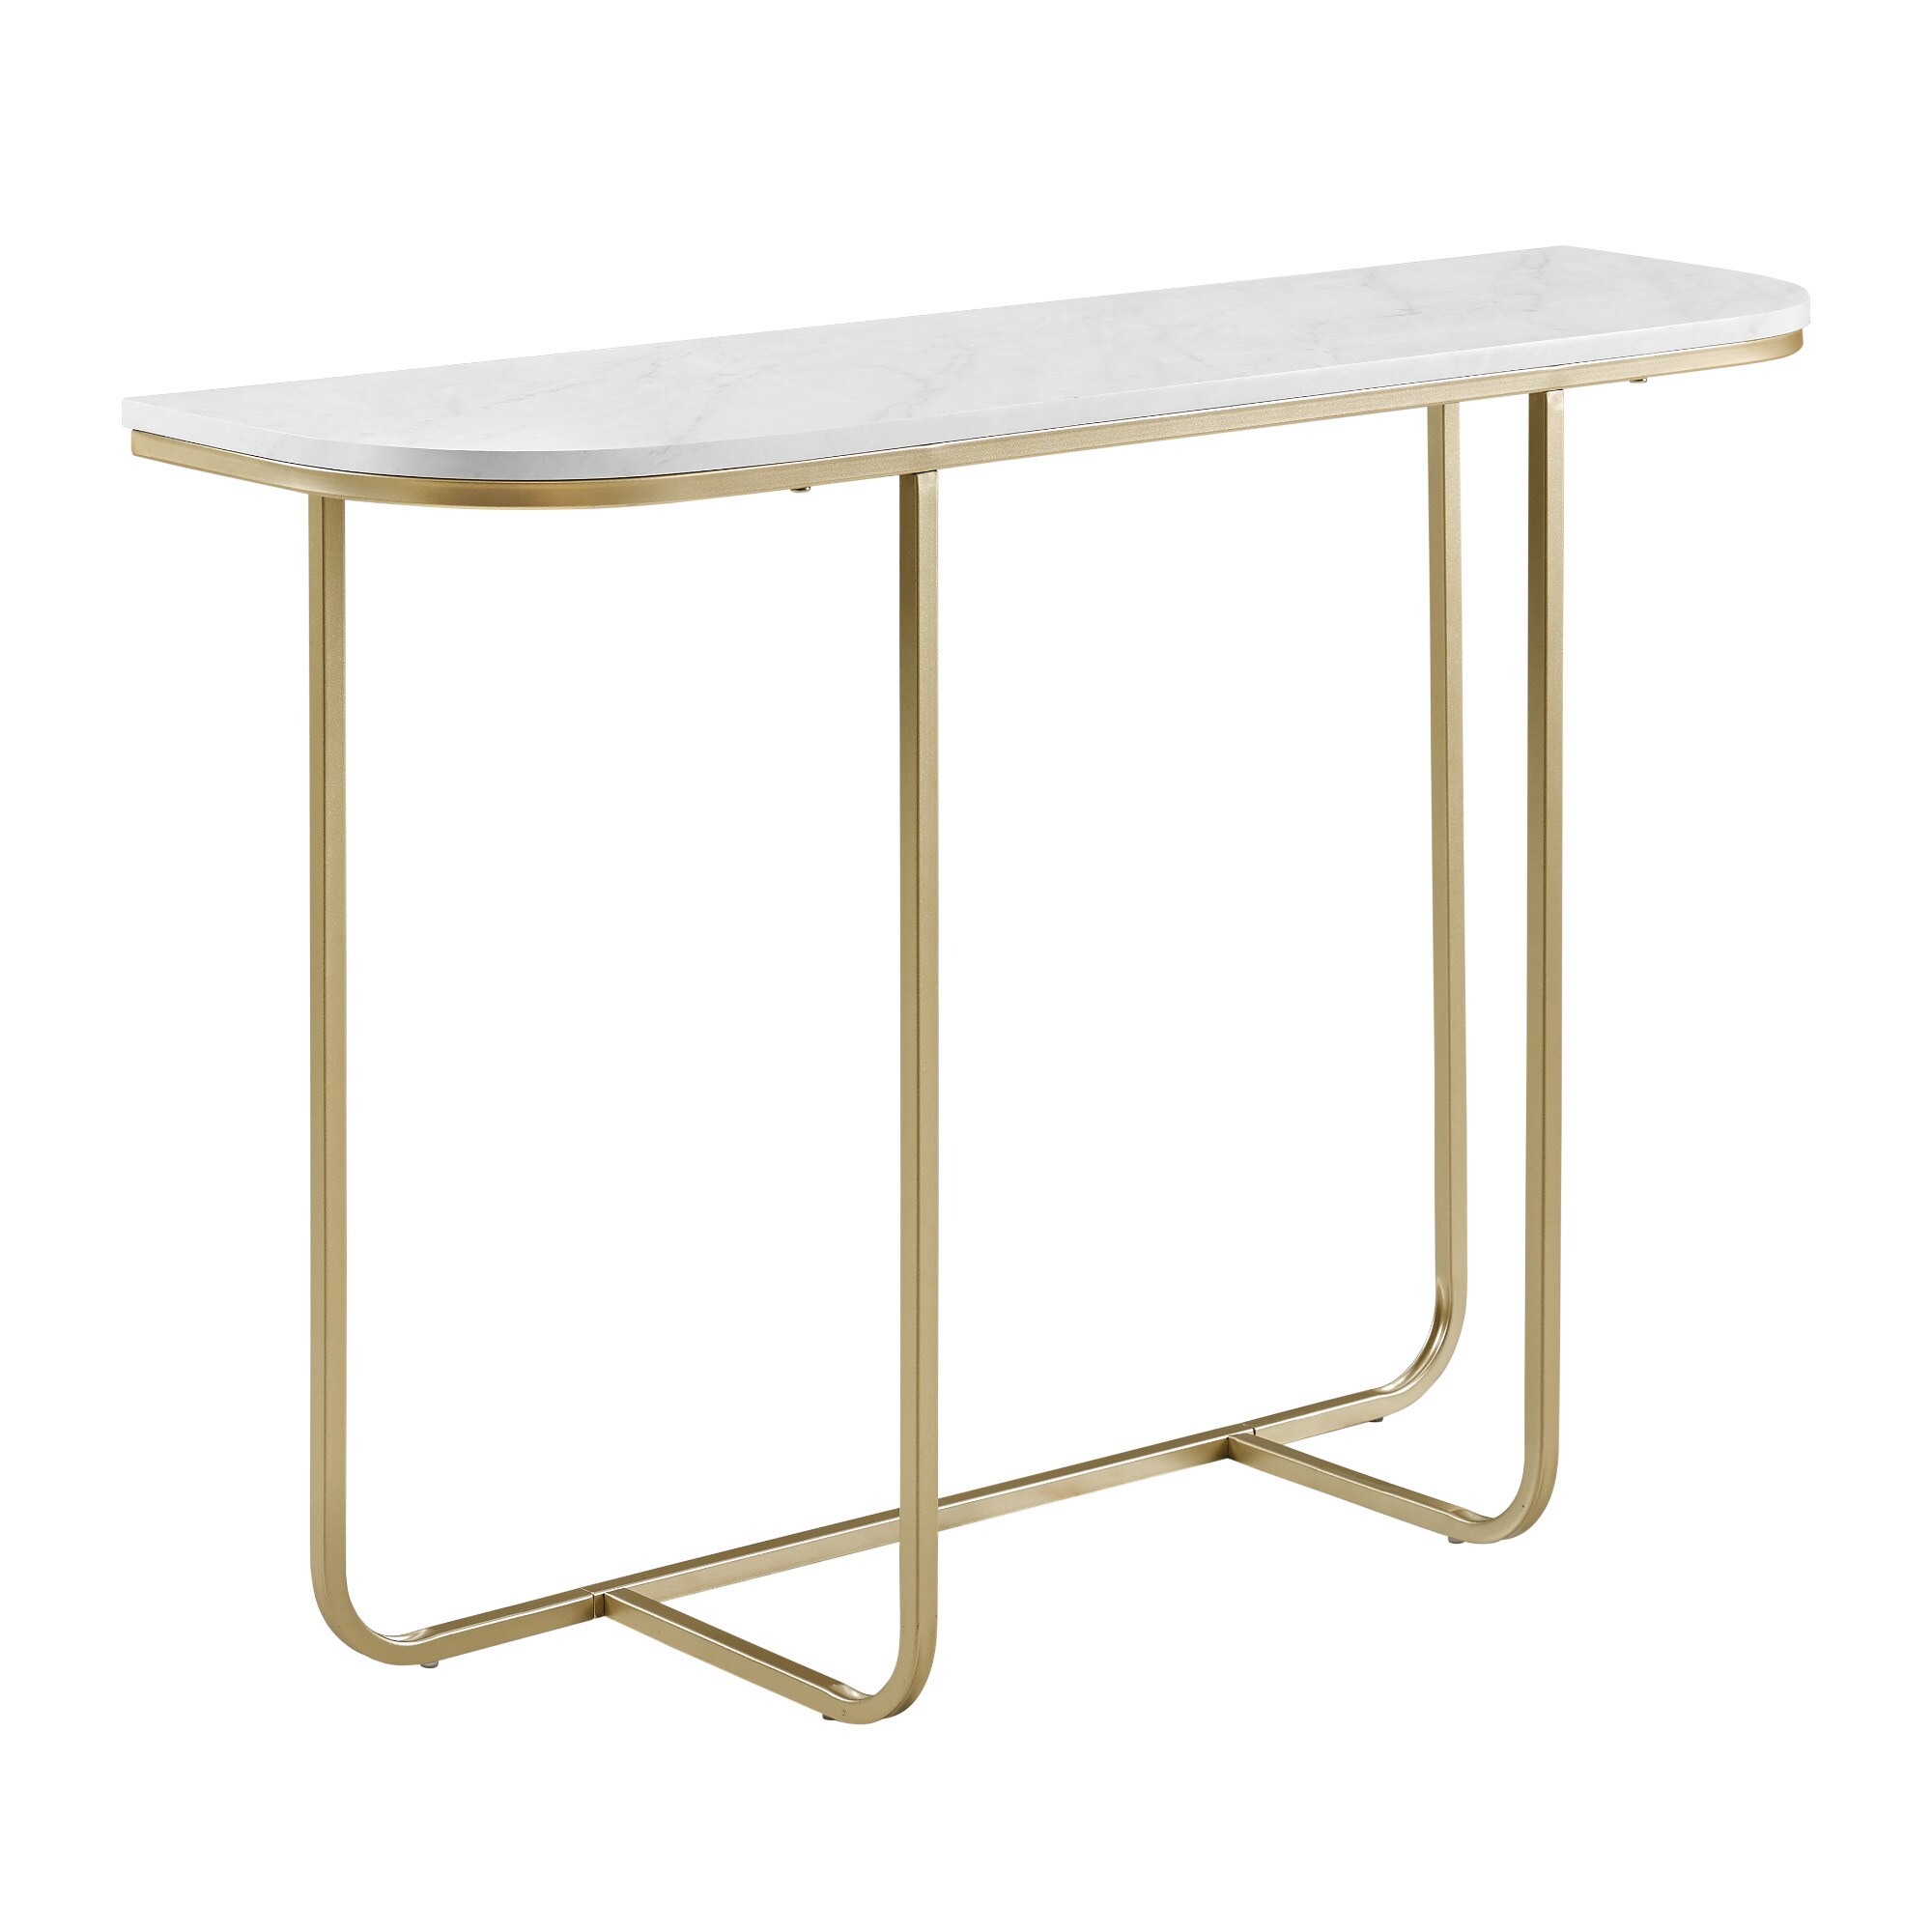 Pinchazo pecho terciopelo Walker Edison Modern White Faux Marble Sofa Table in the Console Tables  department at Lowes.com